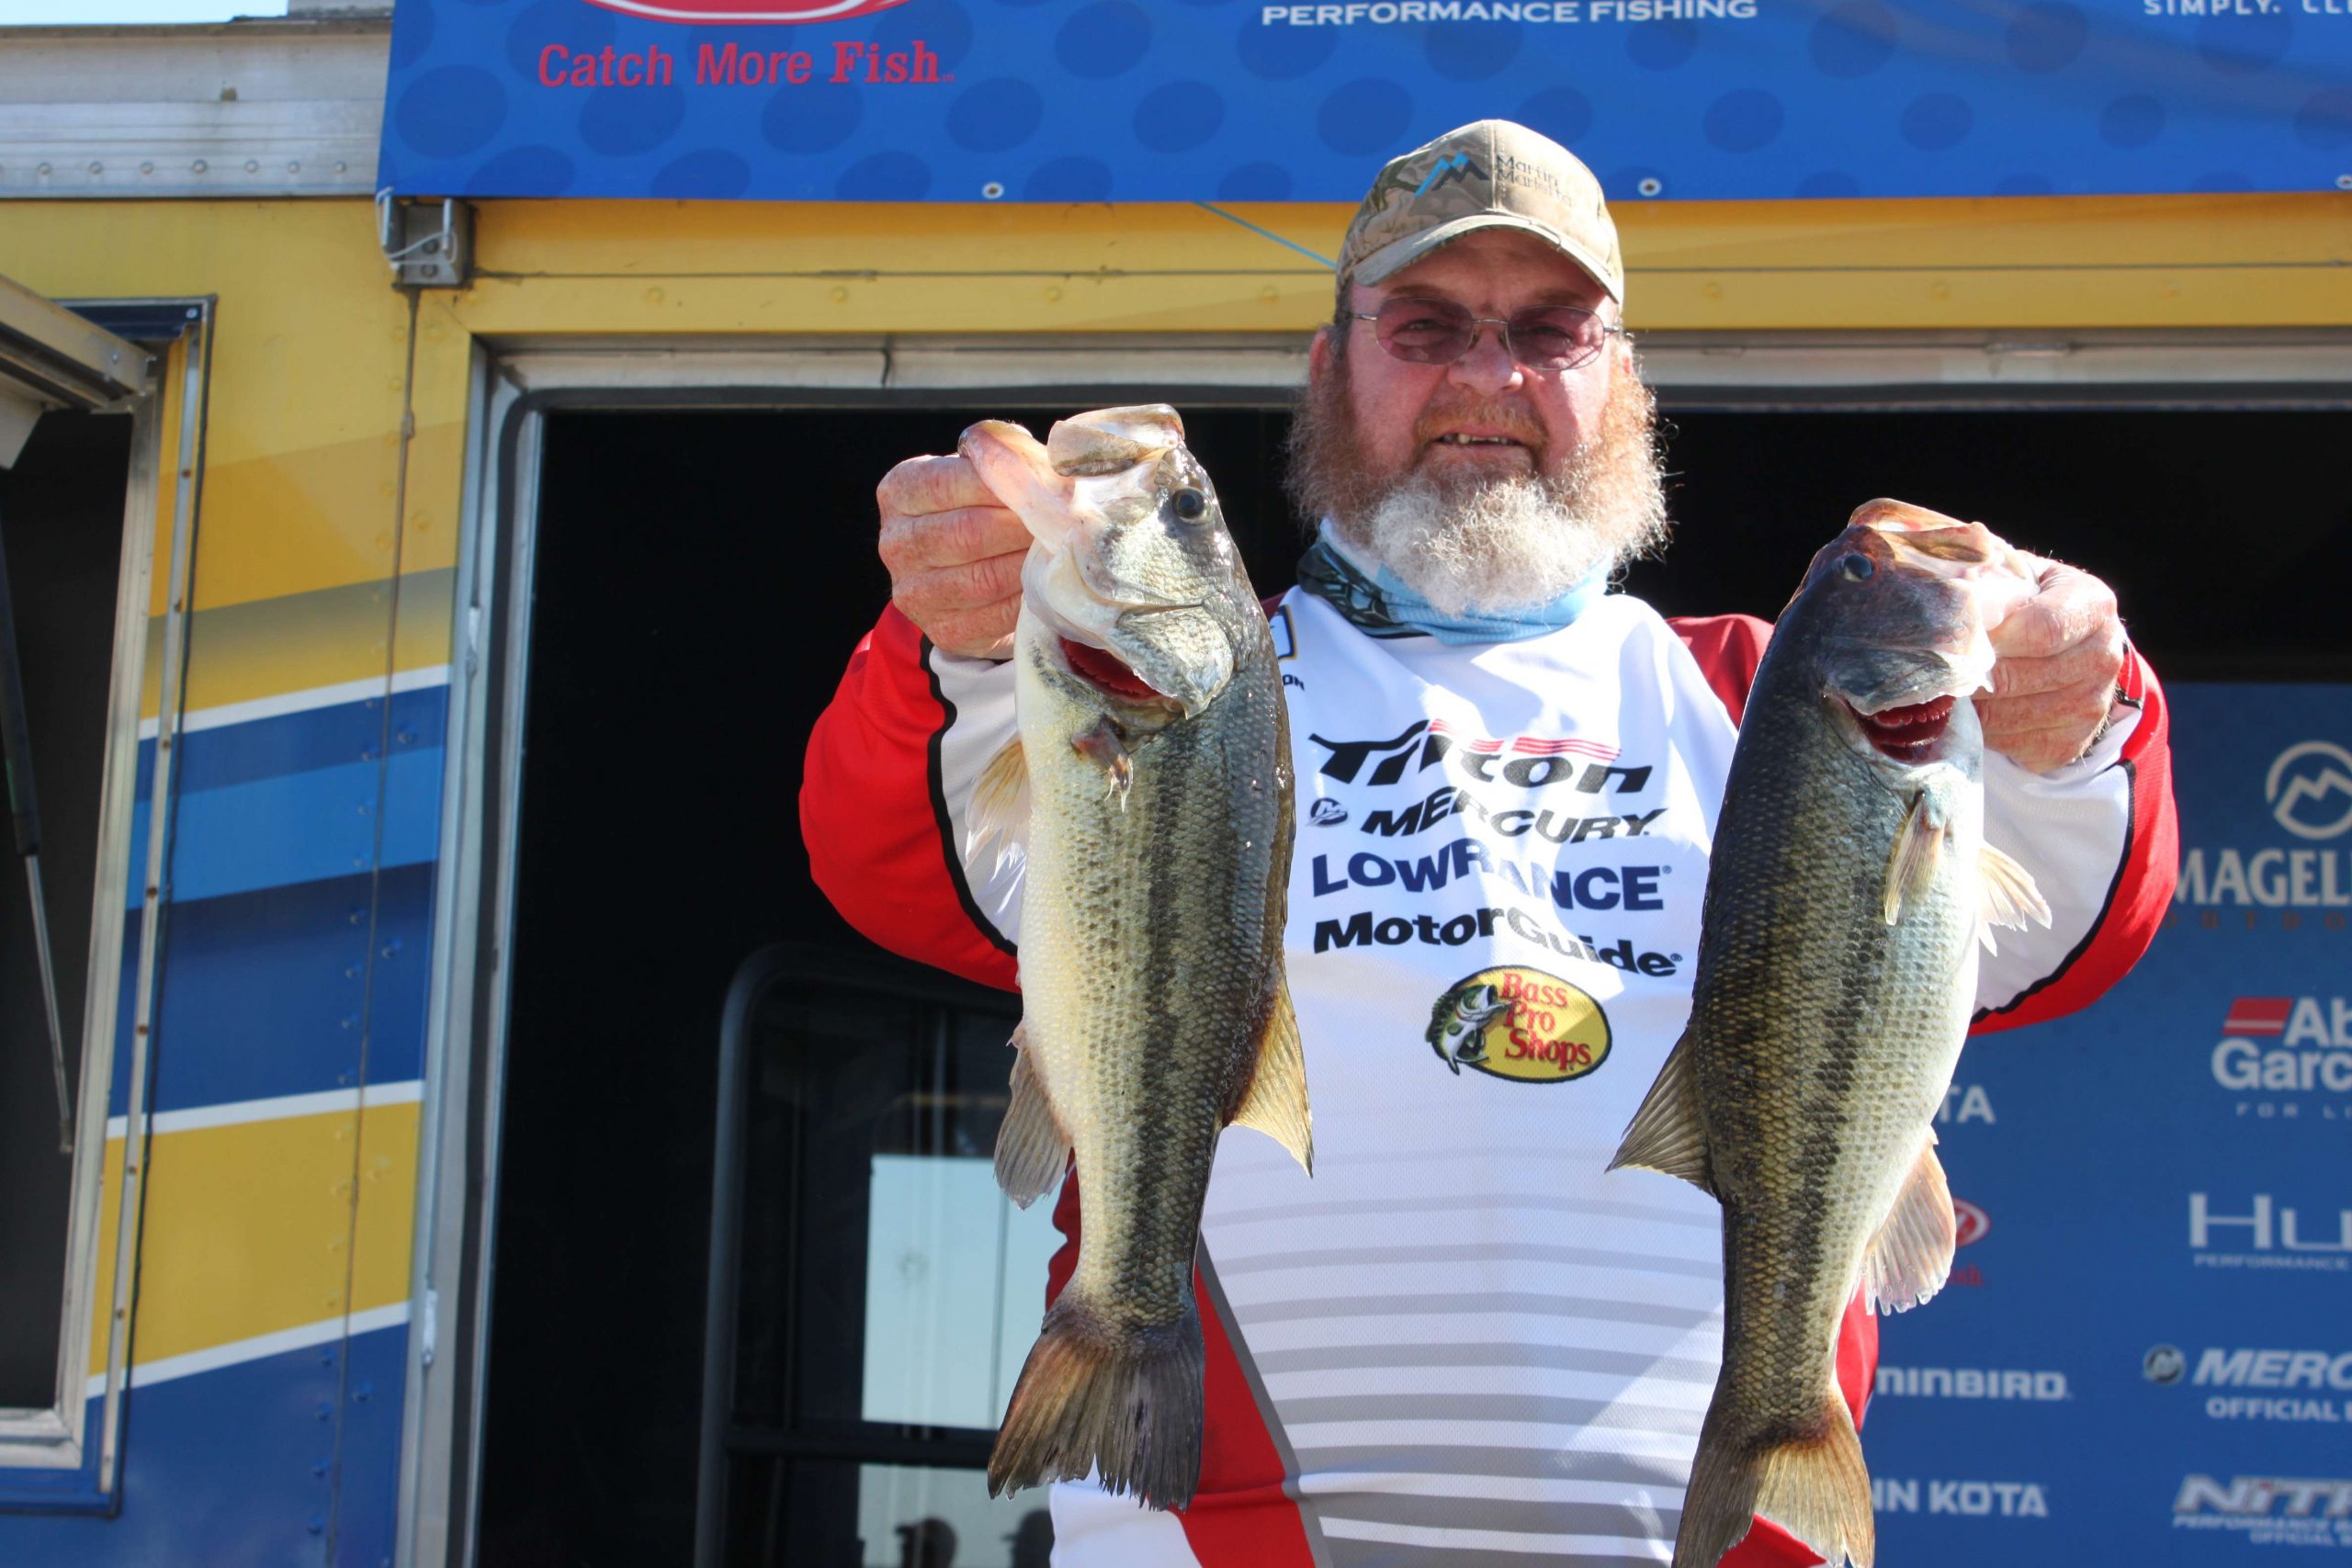 Among the first to weigh in Wednesday was Ohioâs Stanley Dodson who caught five bass that weighed 14-12, which was good enough for a tie for 30th place among boaters.